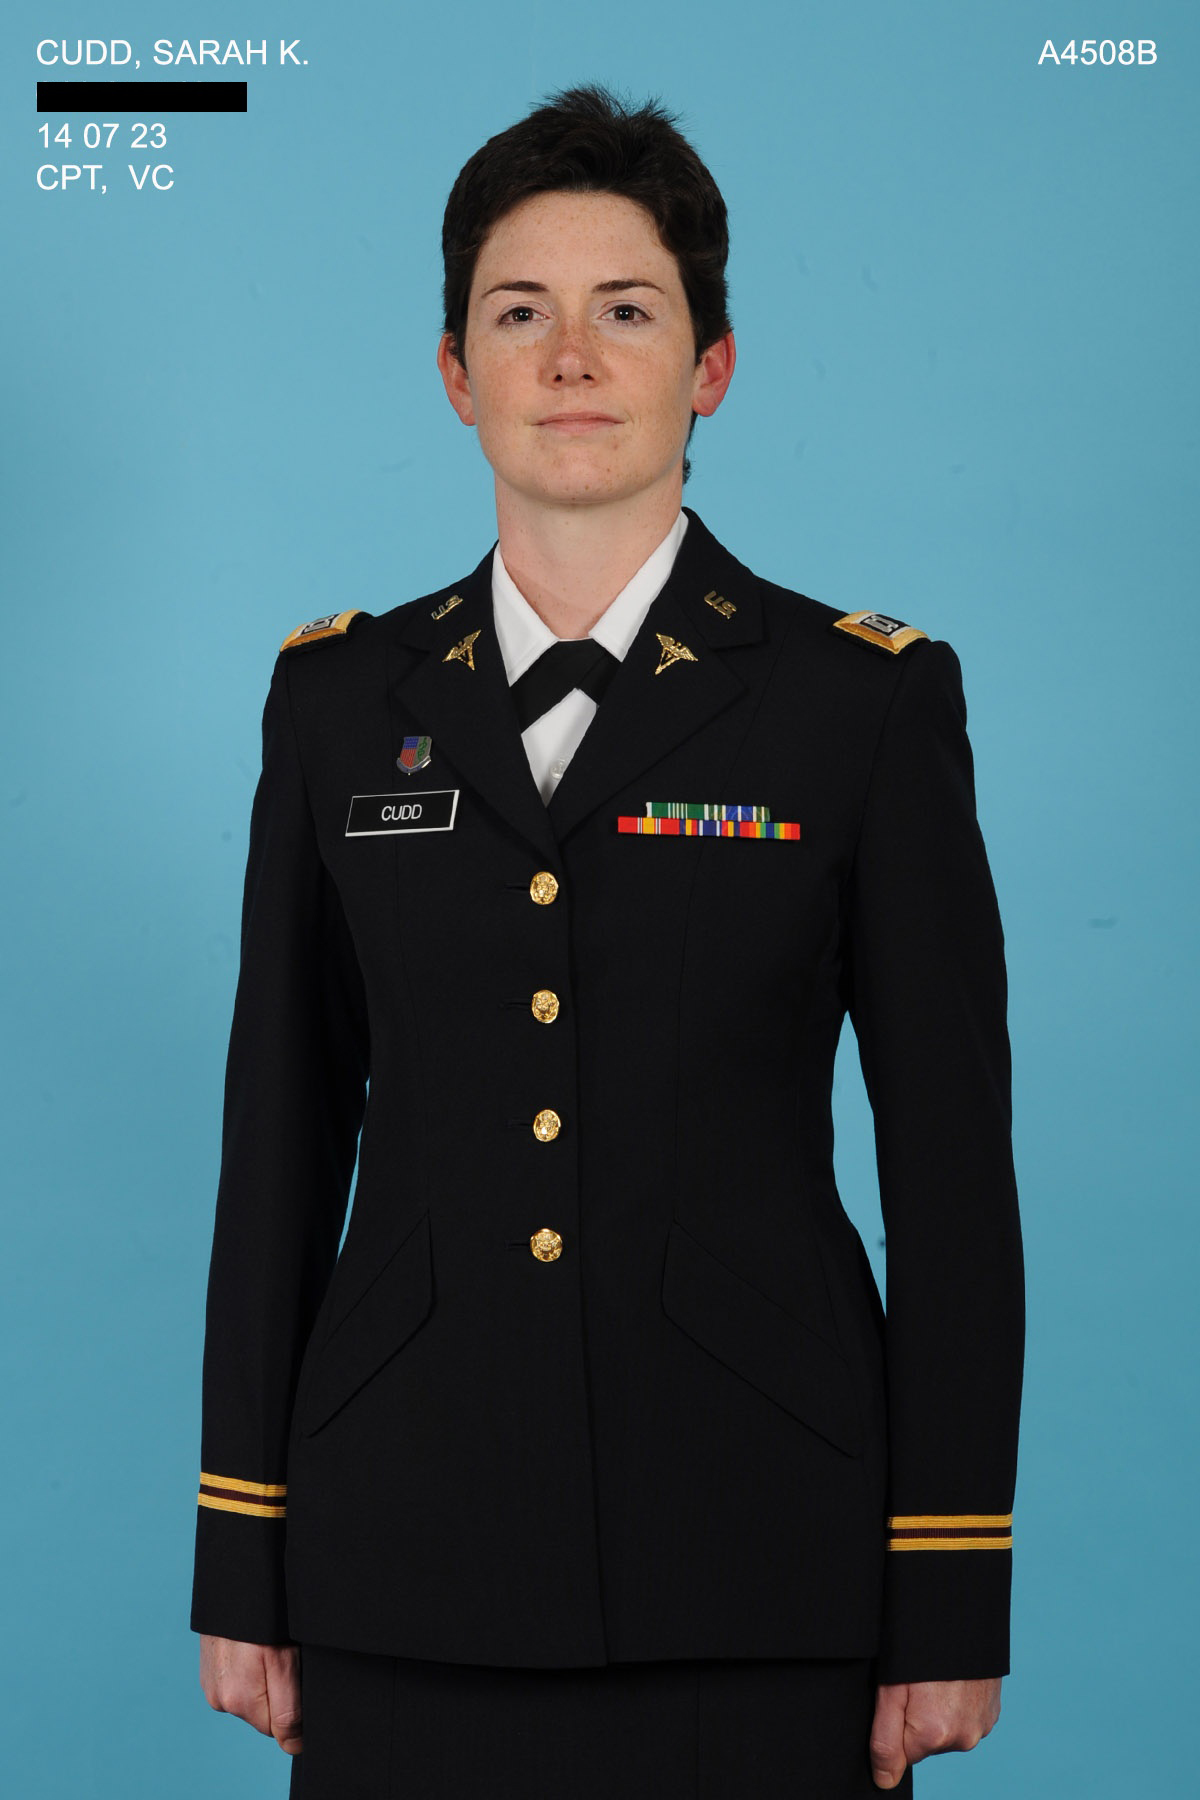 PHOTO: Captain Sarah Cudd is shown in an official Army photo.
